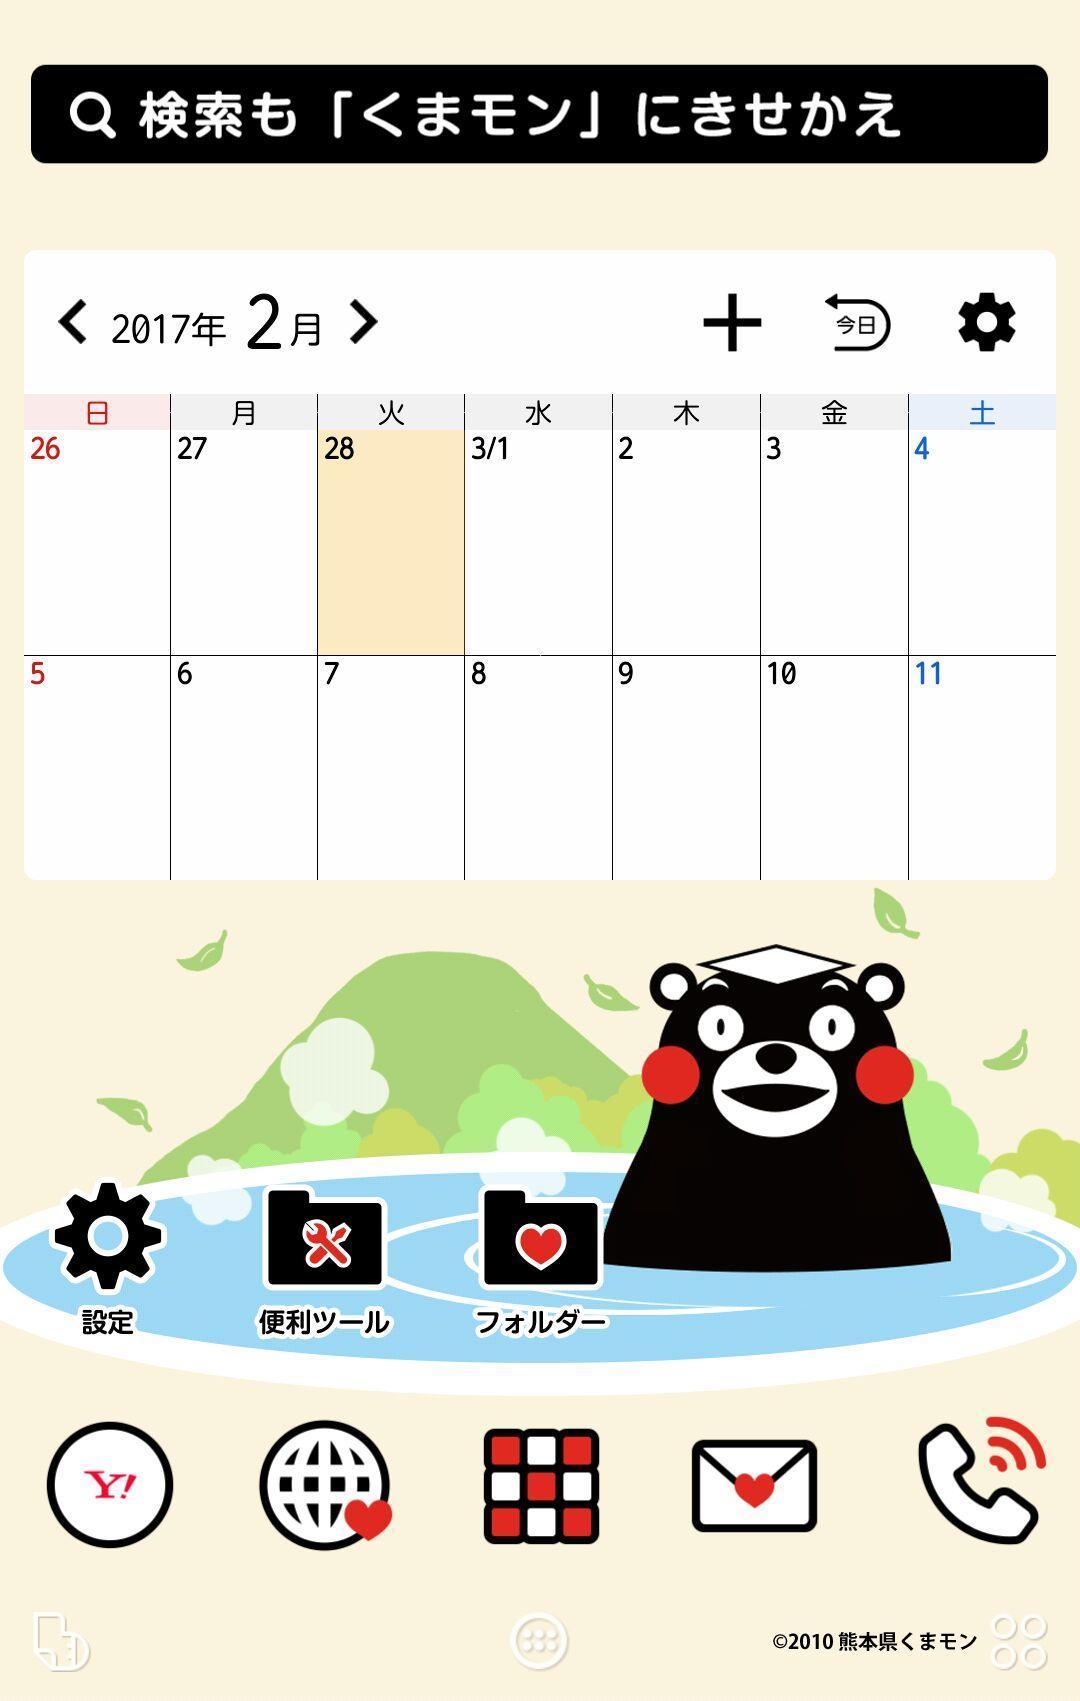 Download くまモン 壁紙きせかえ Android On Pc